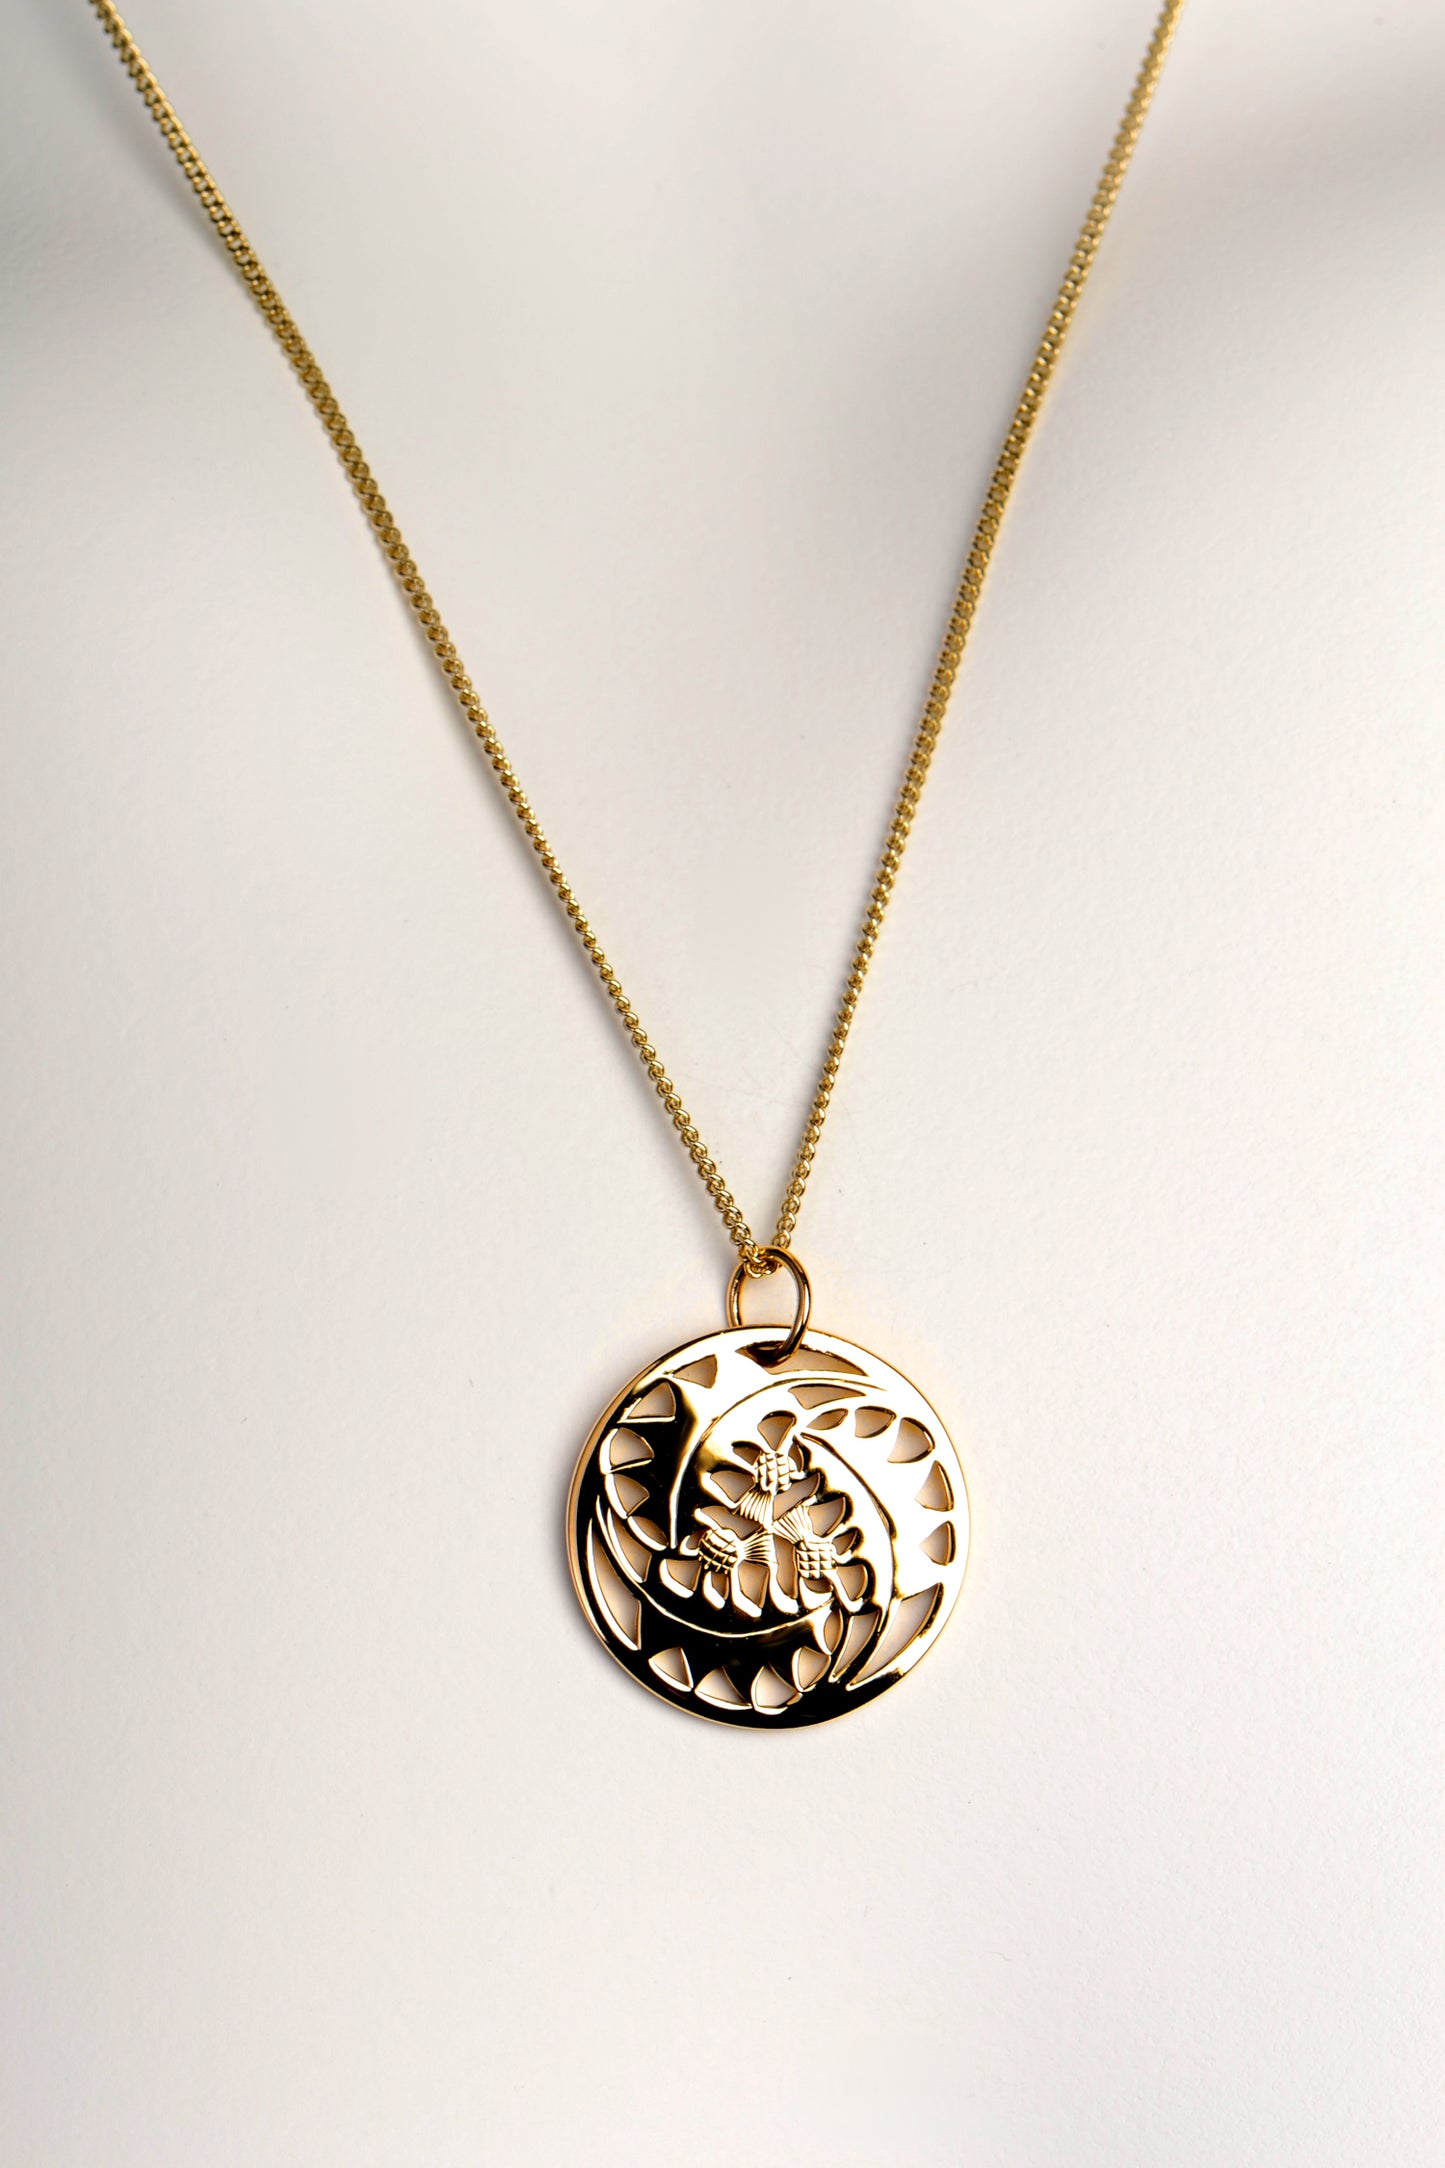 Thistle pendant in 9ct yellow gold